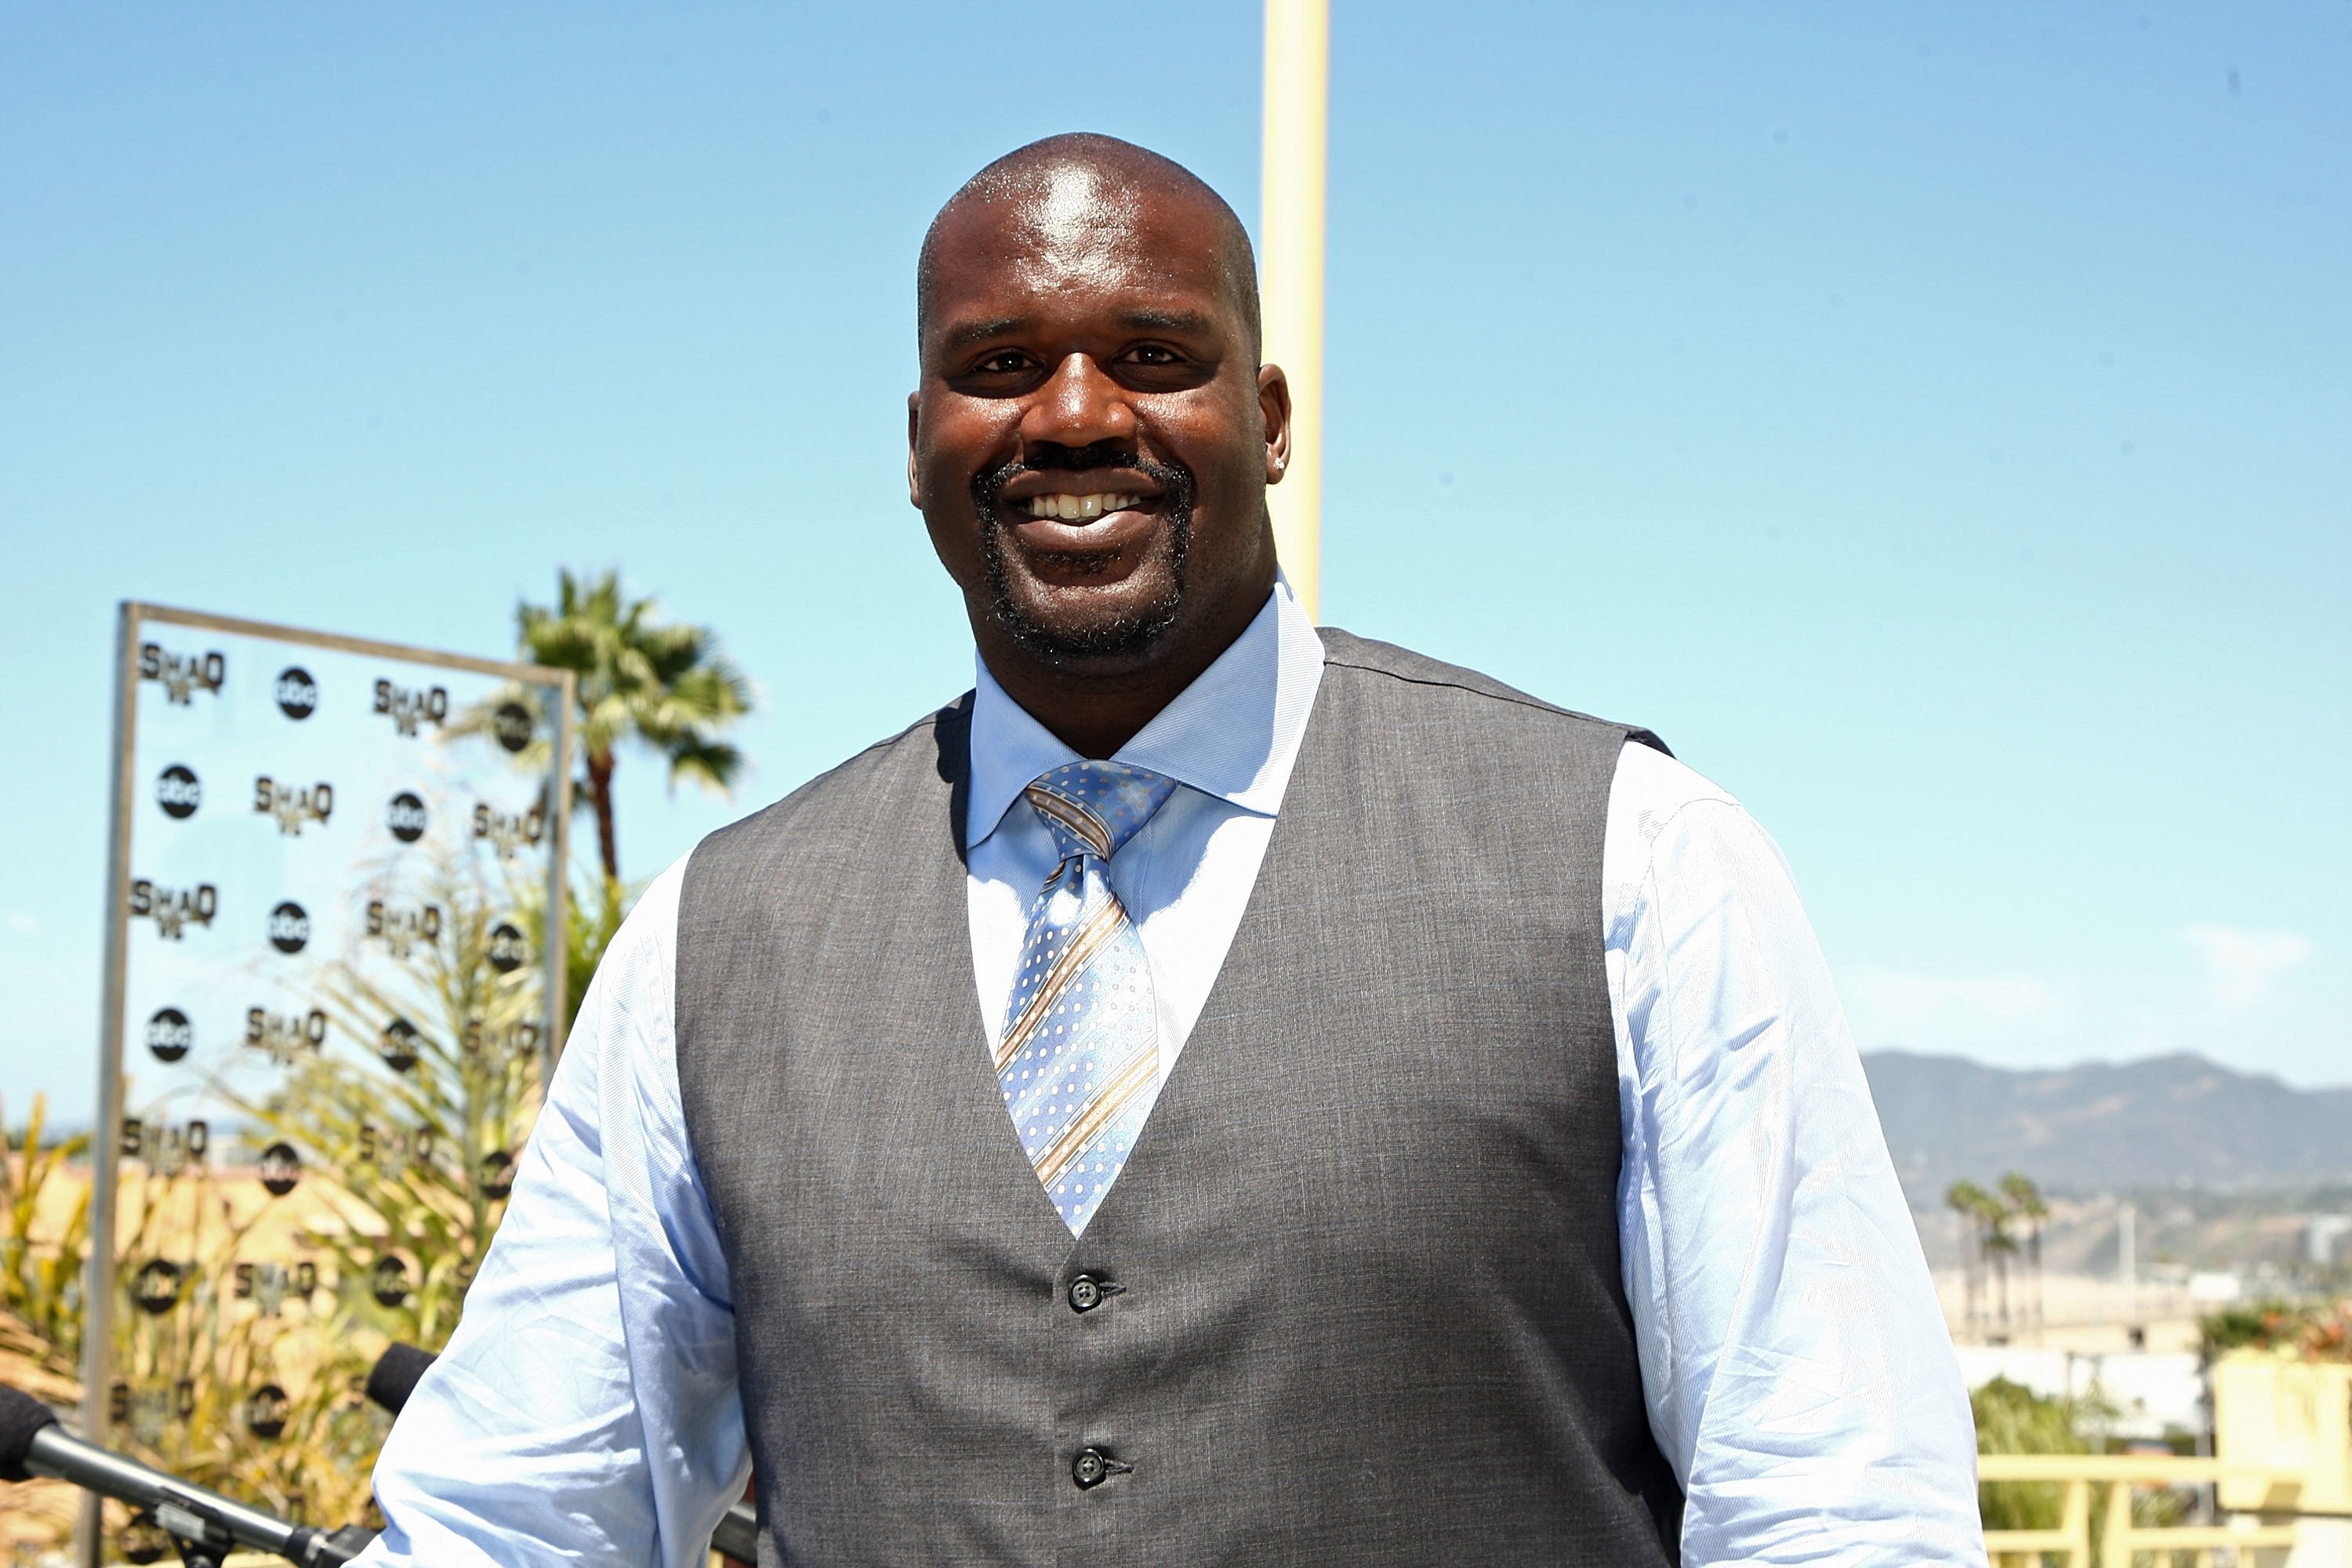  NBA player Shaquille O'Neal attends a press conference for ABC's new reality show "Shaq Vs." held at the Lowes Hotel on August 5, 2009 in Santa Monica, California. | Photo: Getty Images